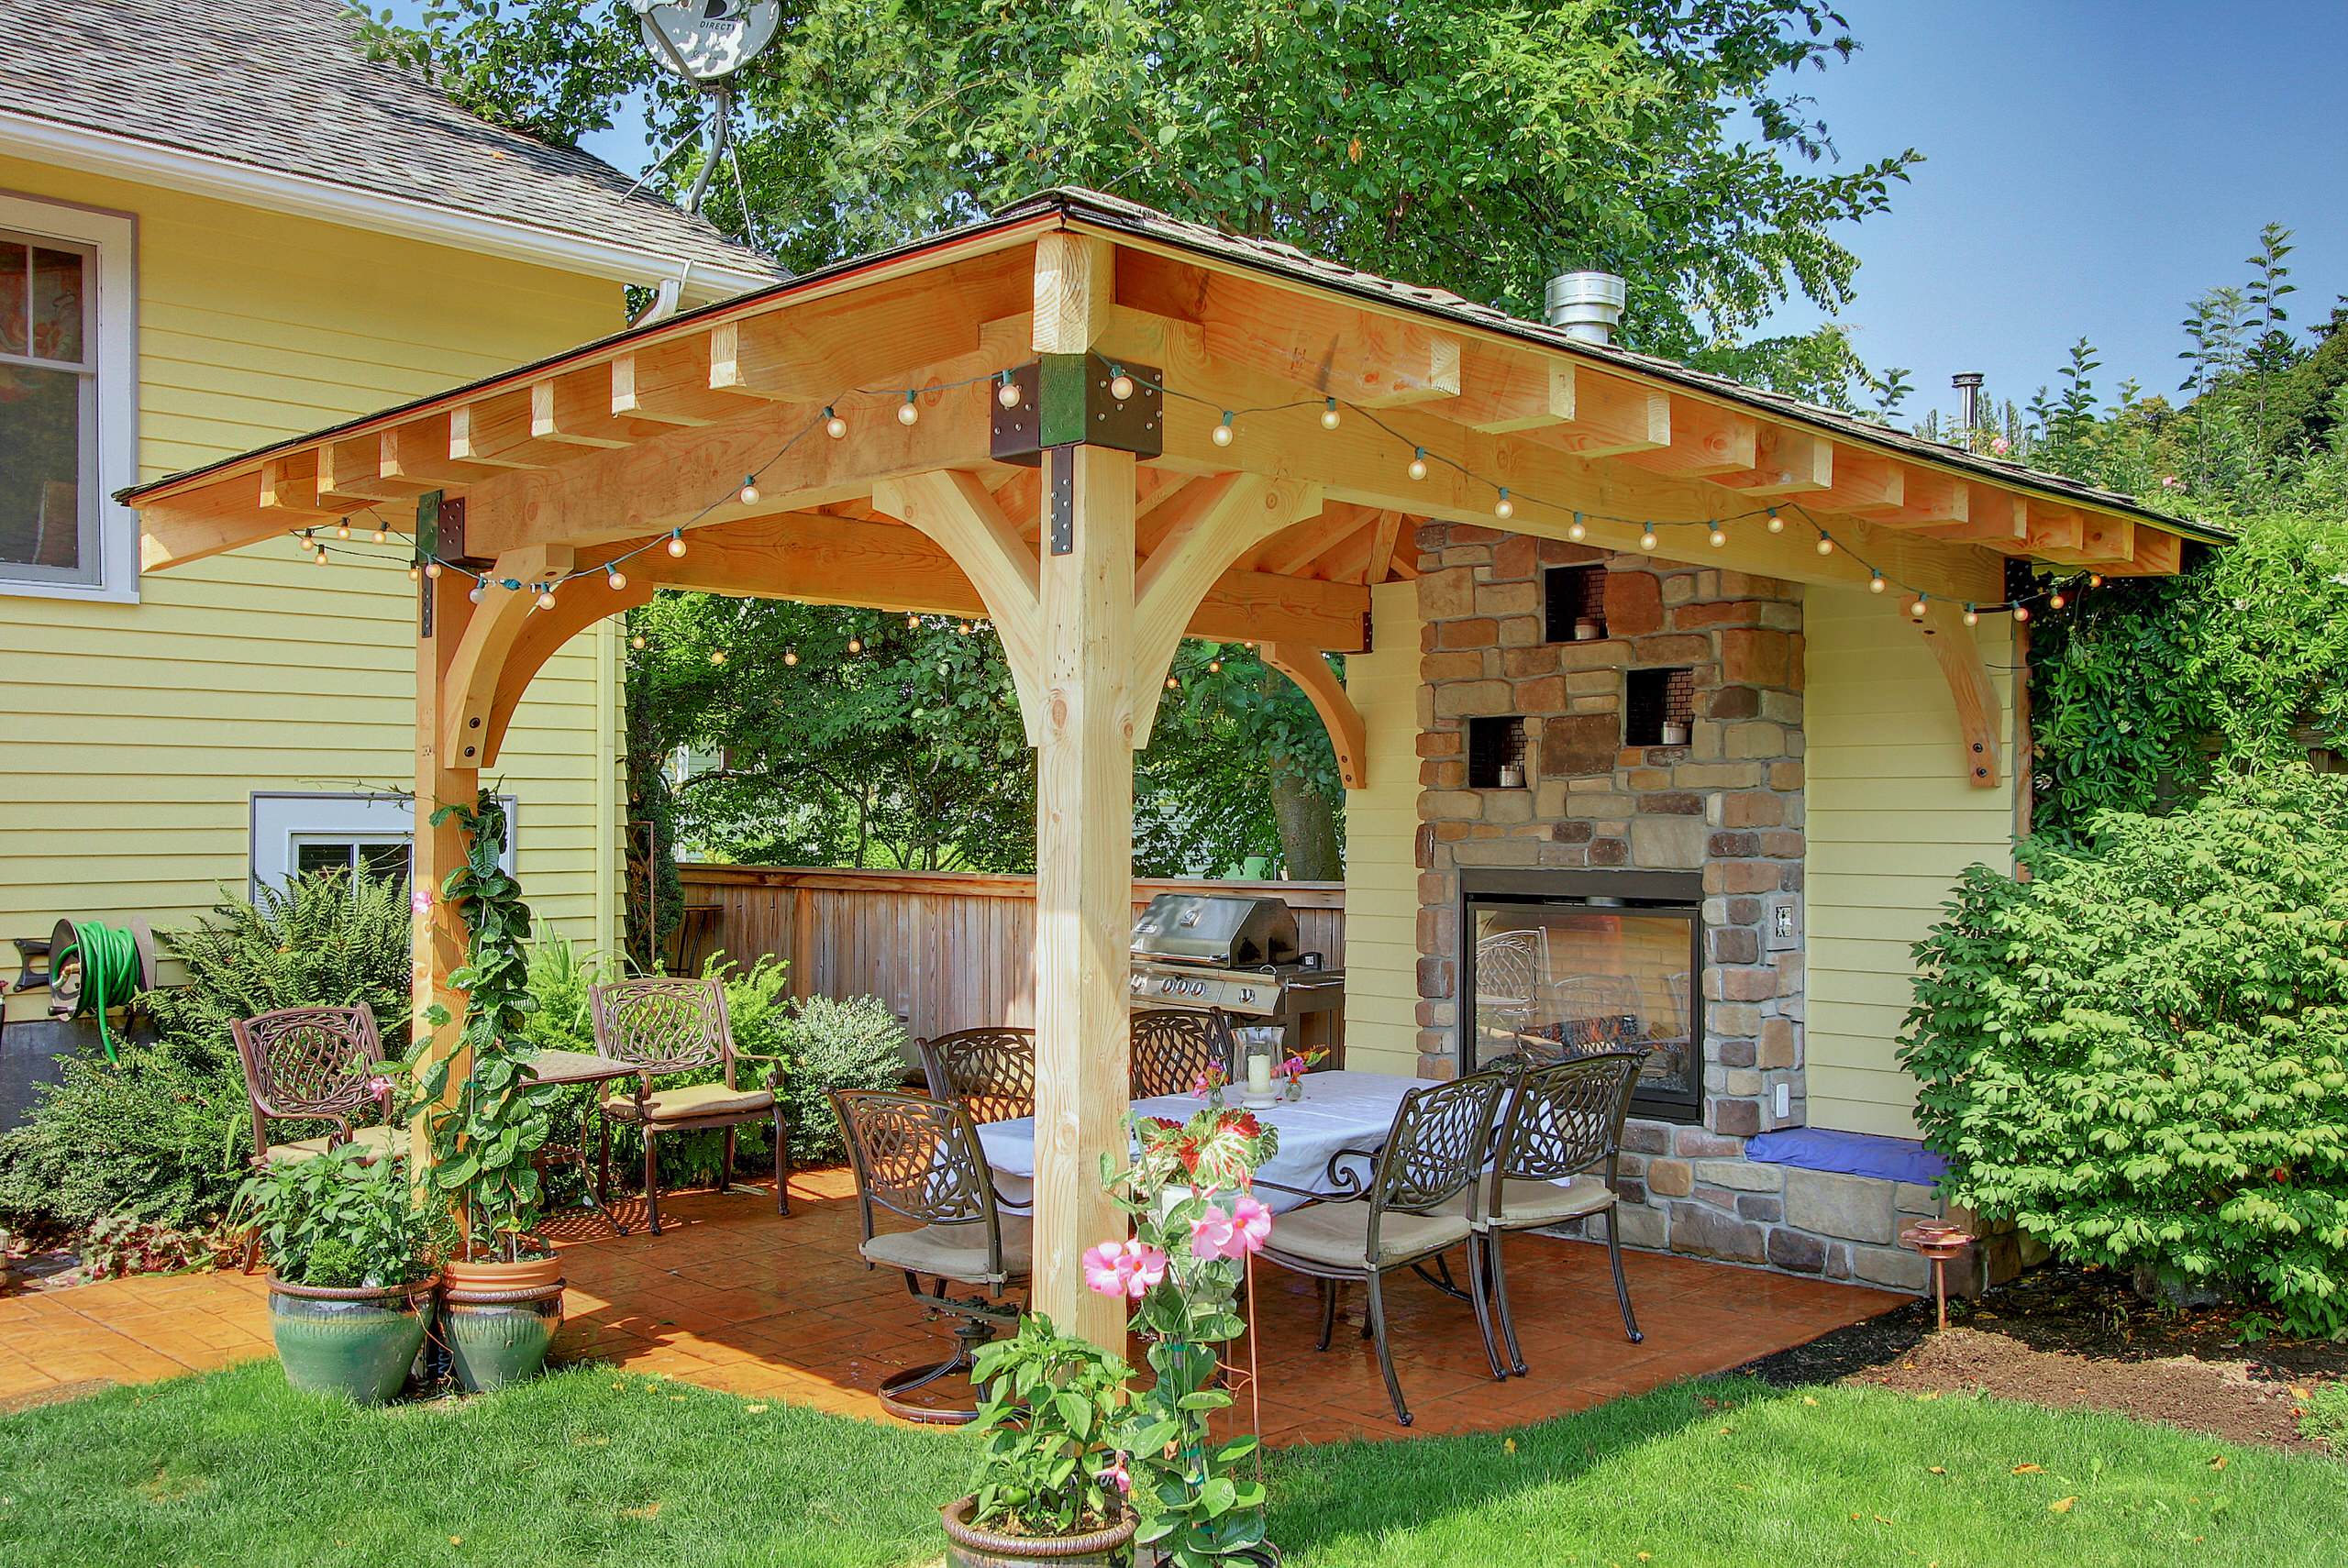 75 Beautiful Patio With A Fire Pit And A Gazebo Pictures Ideas December 2021 Houzz